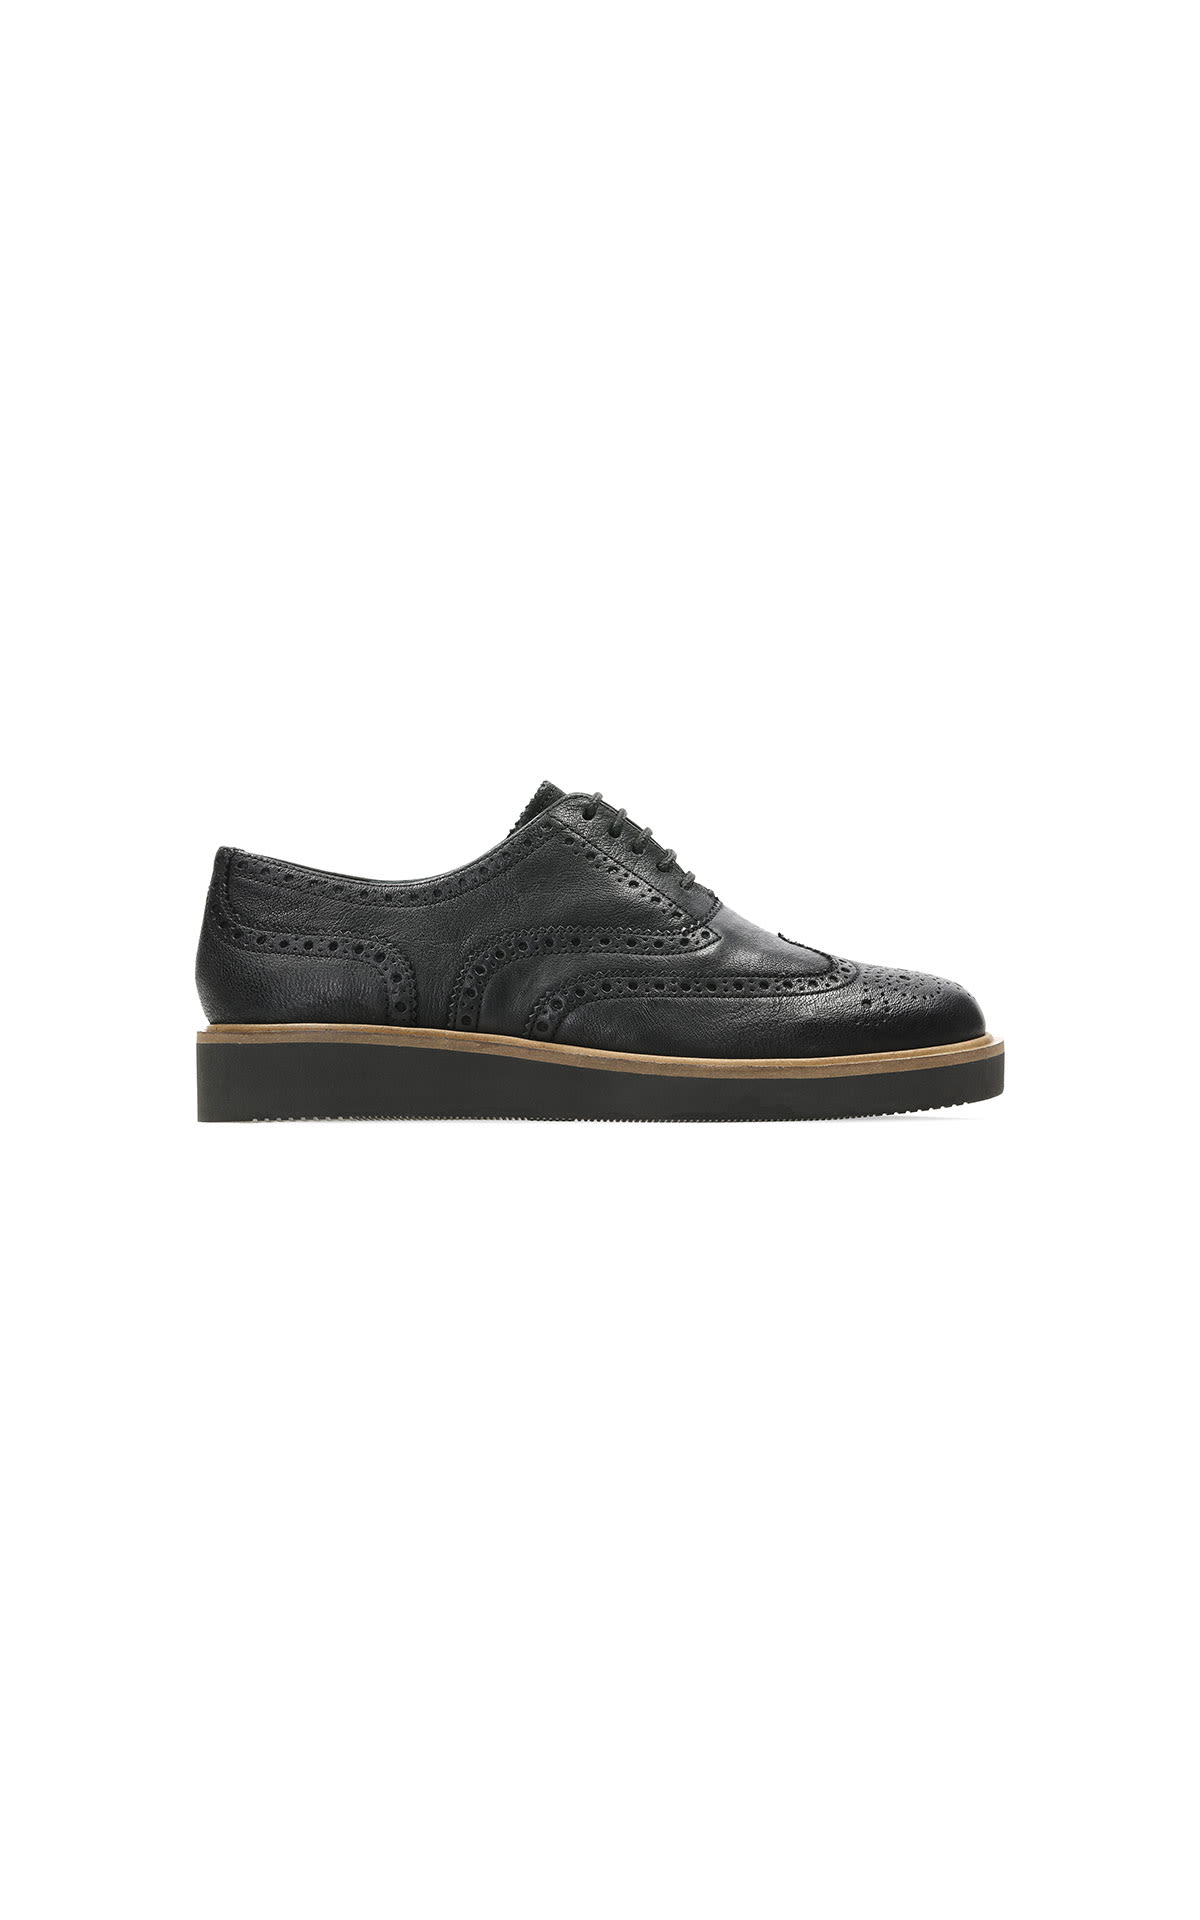 Clarks Glickly brogue black from Bicester Village